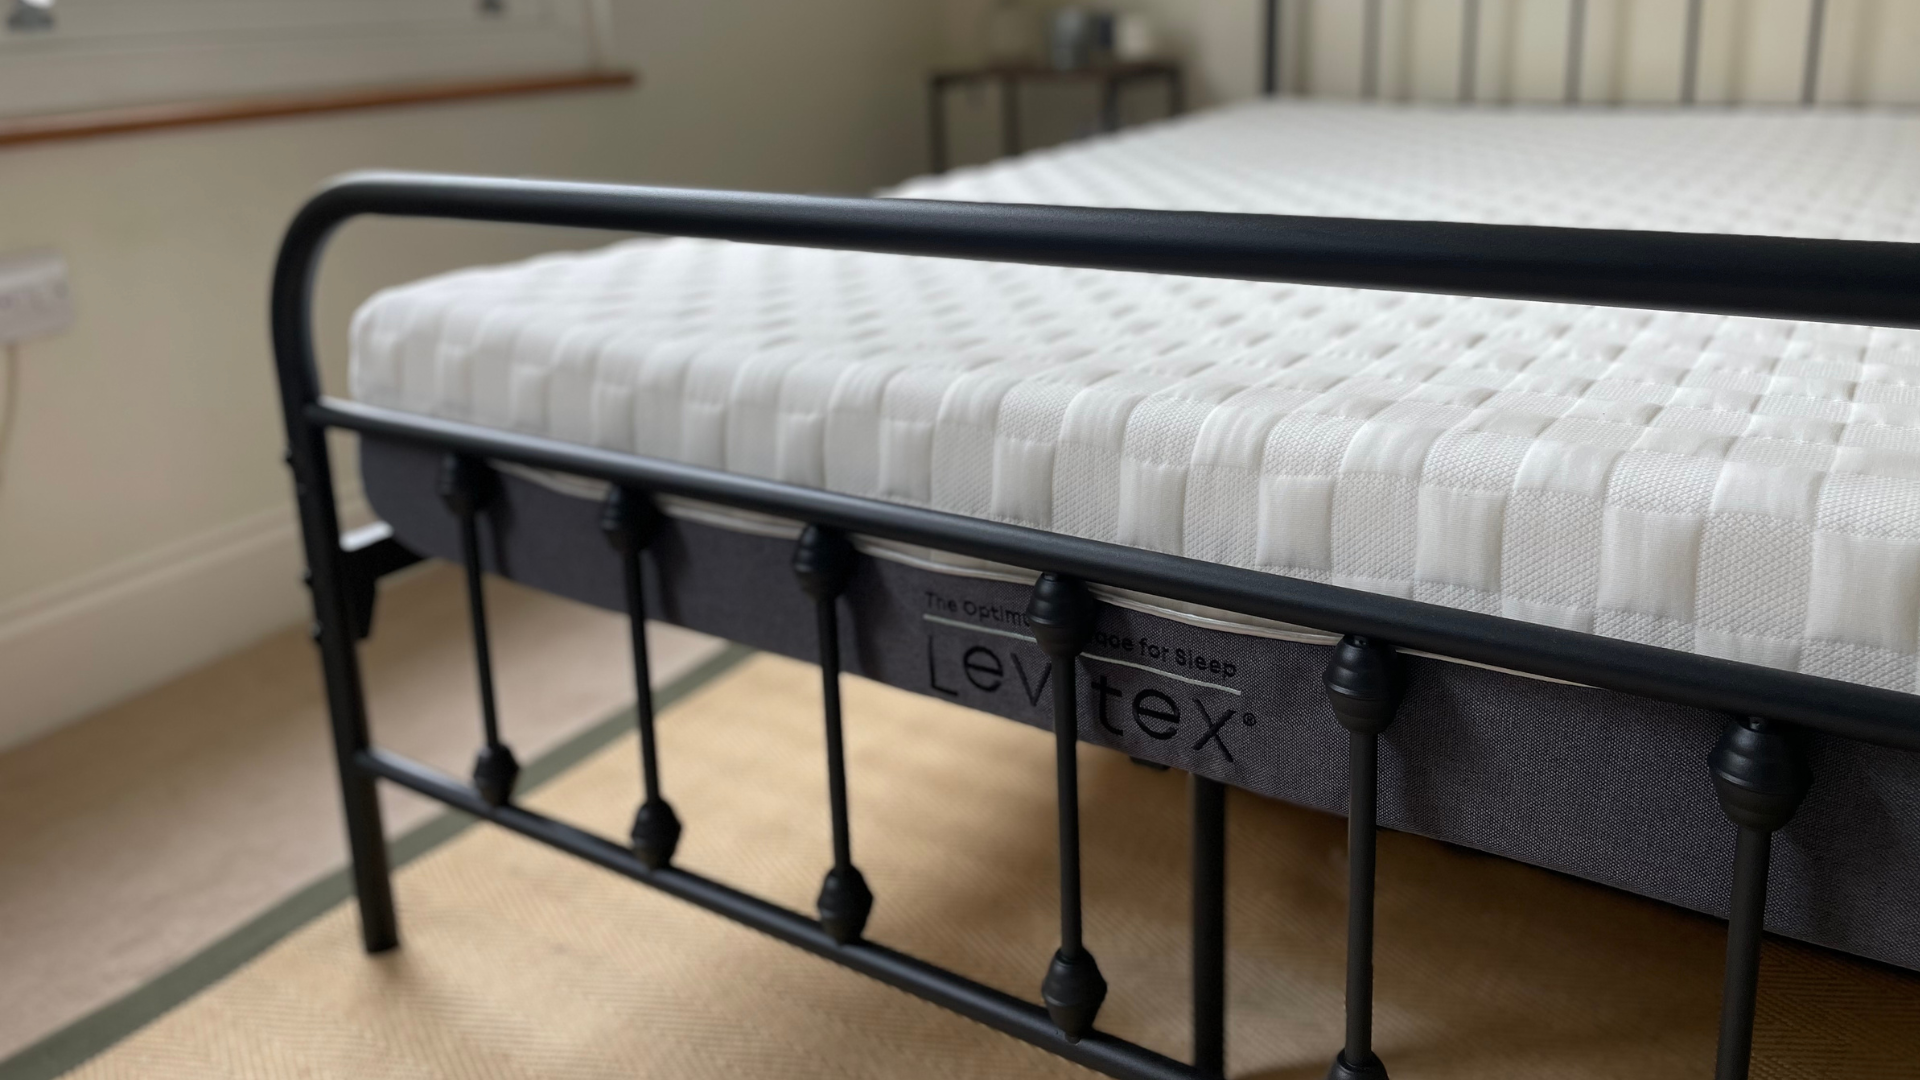 Levitex Sleep Posture Mattress review: a simple but effective way to  optimise sleep